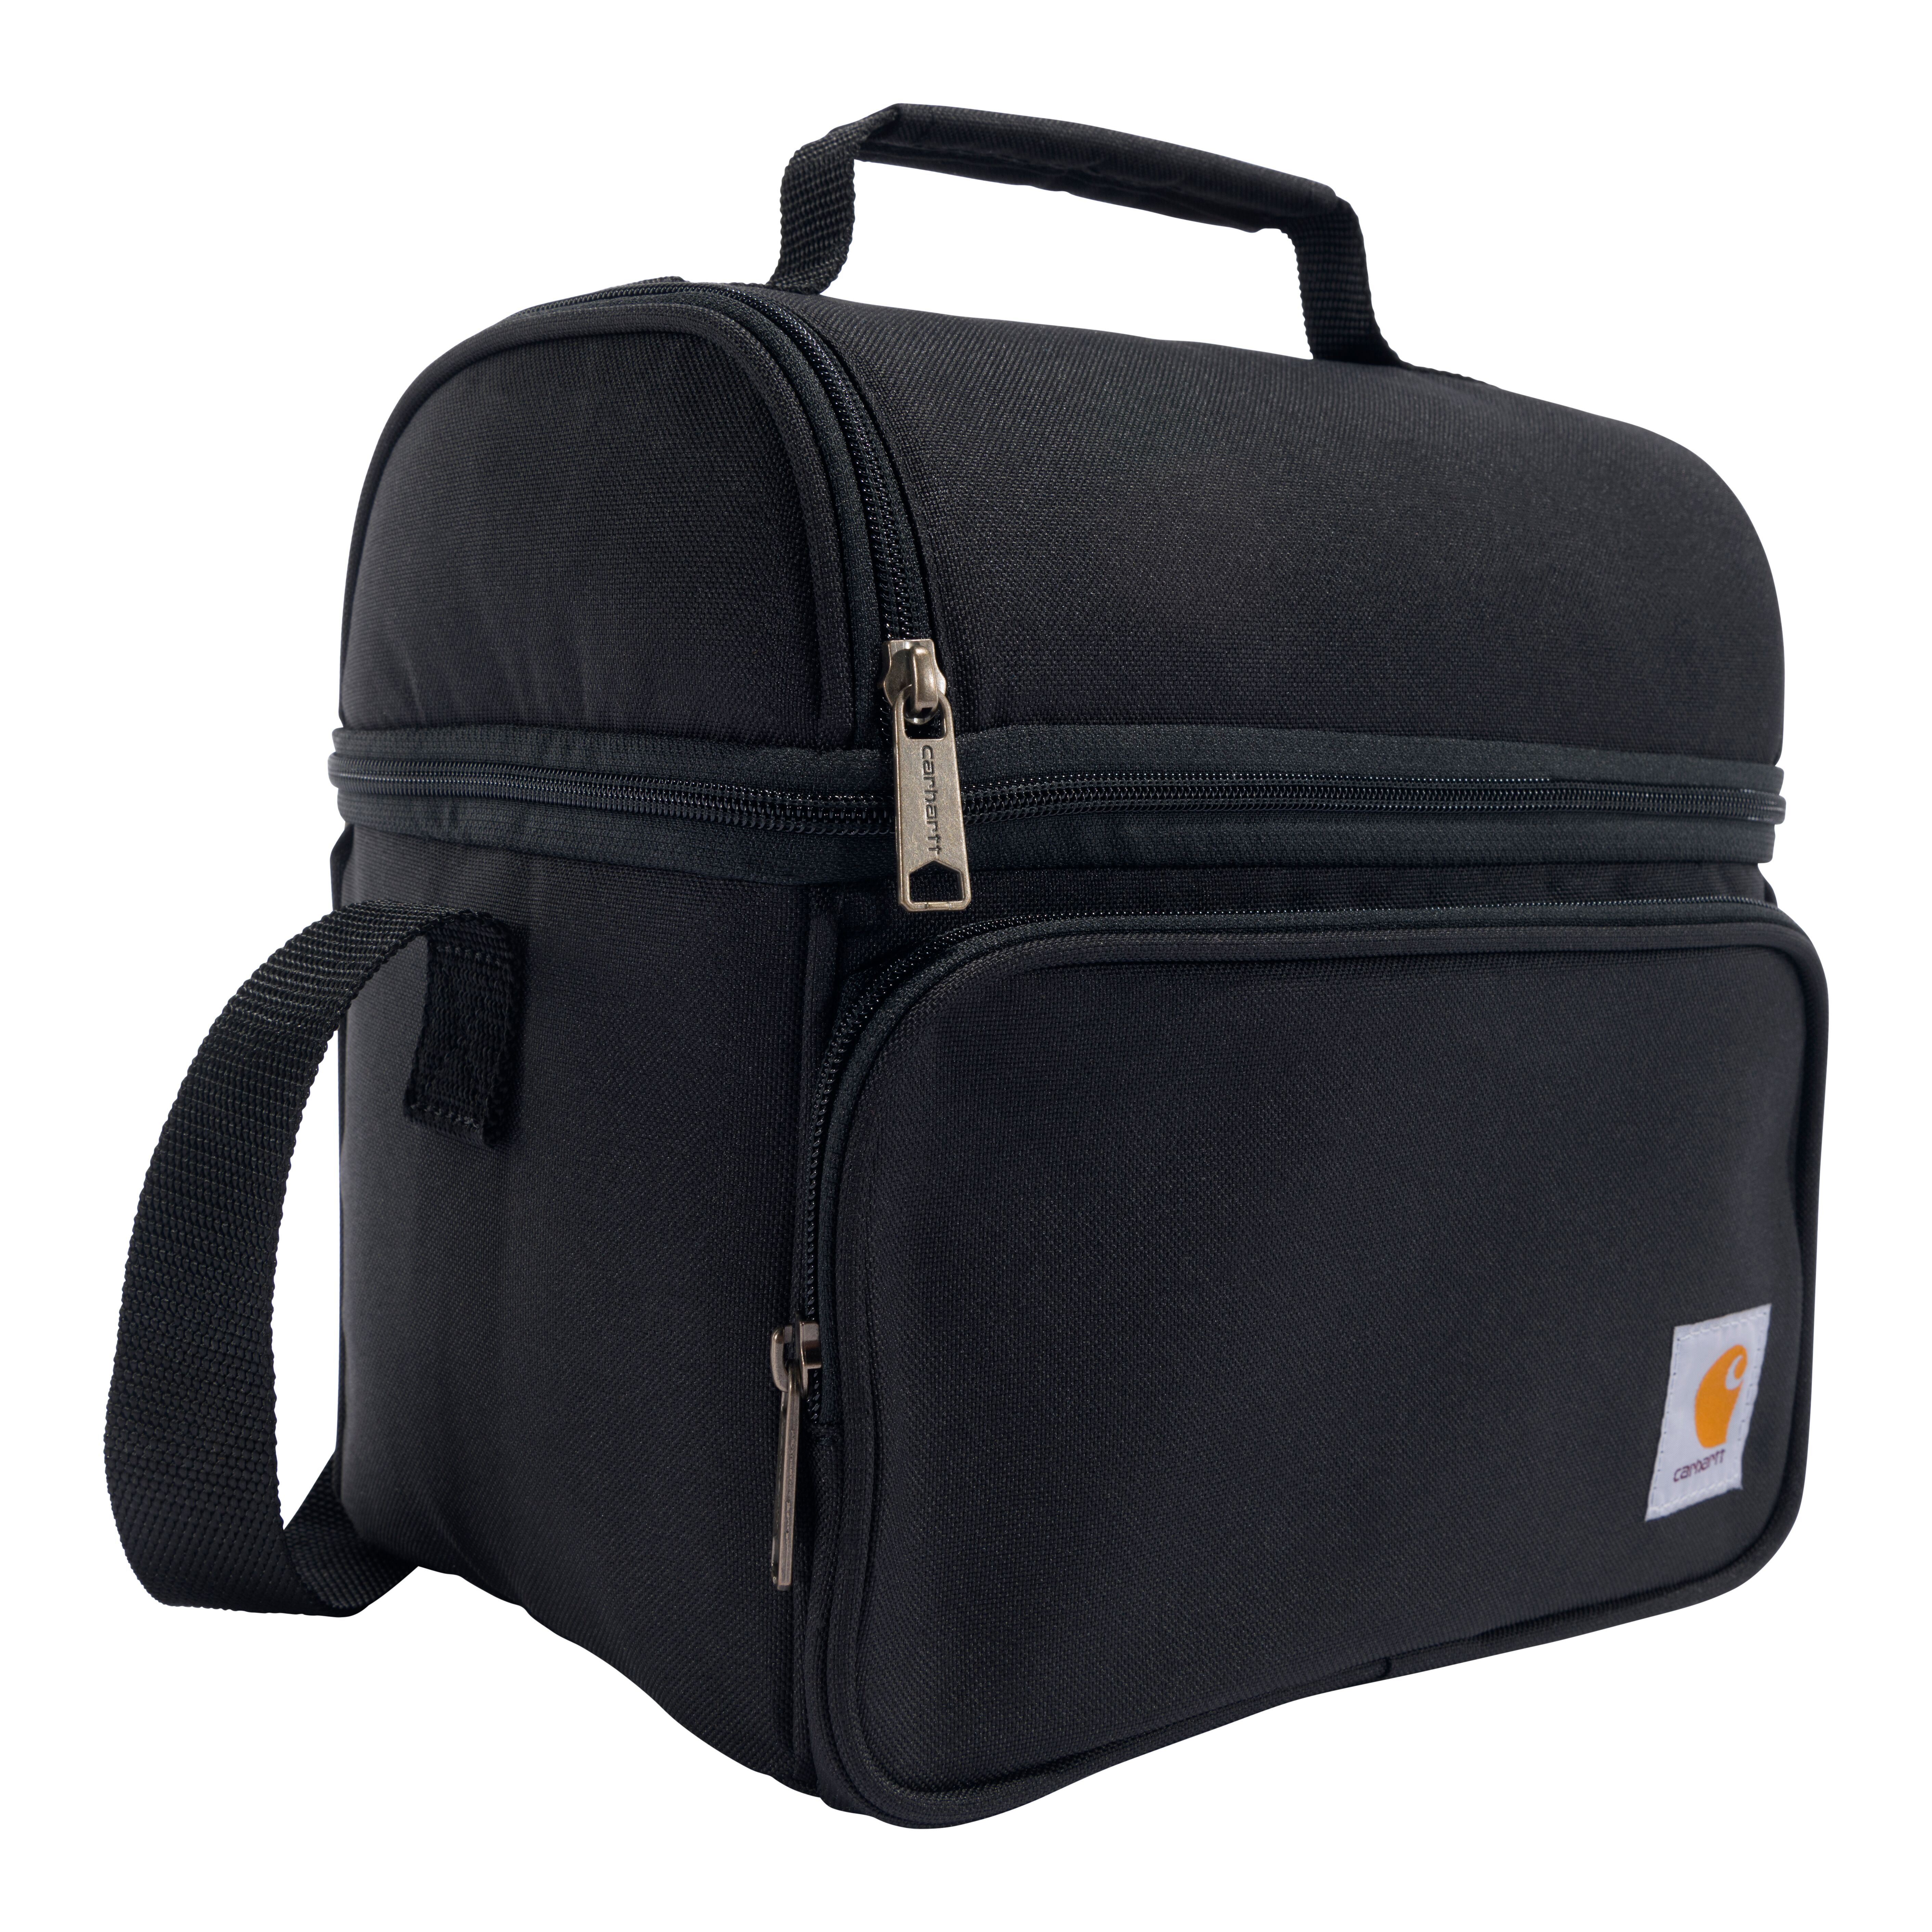 Deluxe Dual Compartment Insulated Lunch Cooler Bag